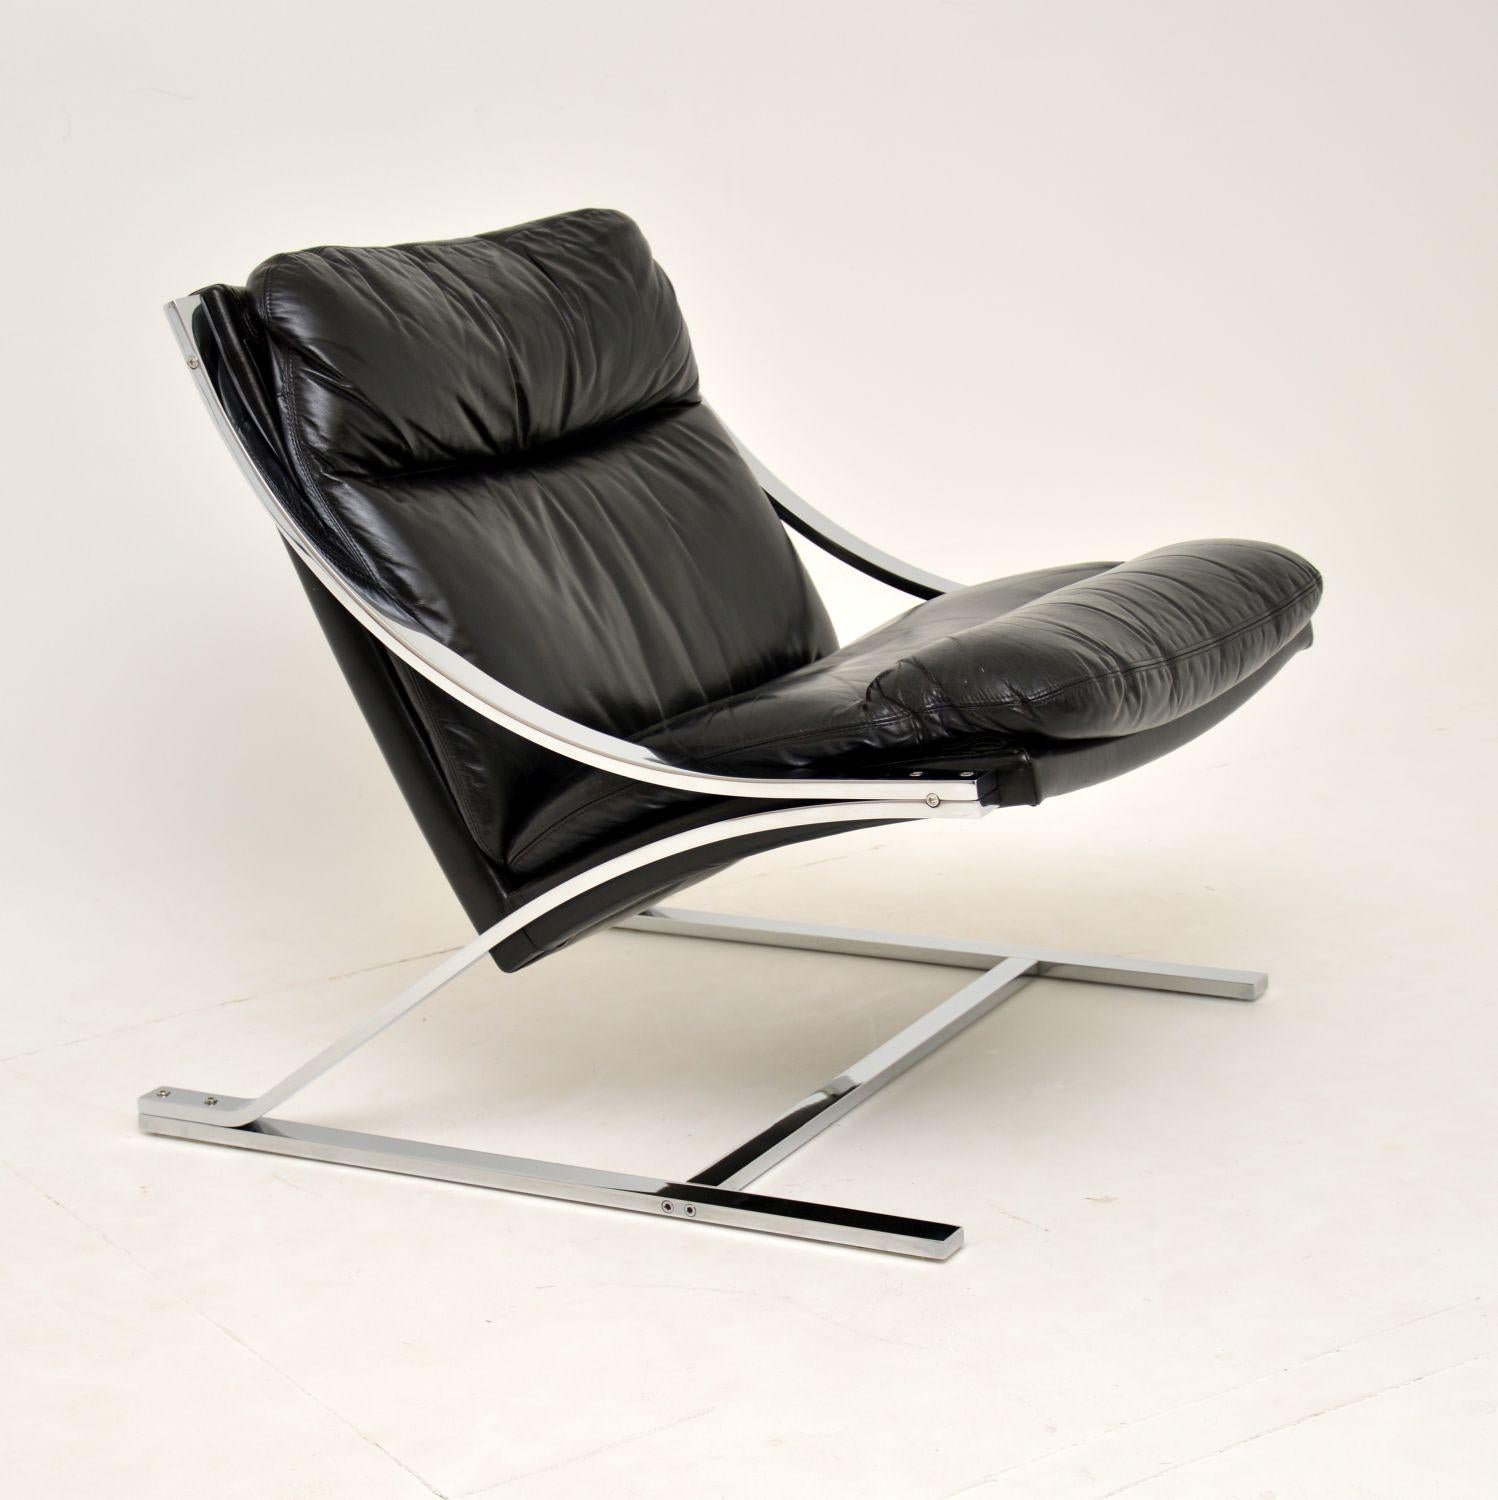 1960's Vintage Leather & Chrome Zeta Chair by Paul Tuttle for Strassle 2